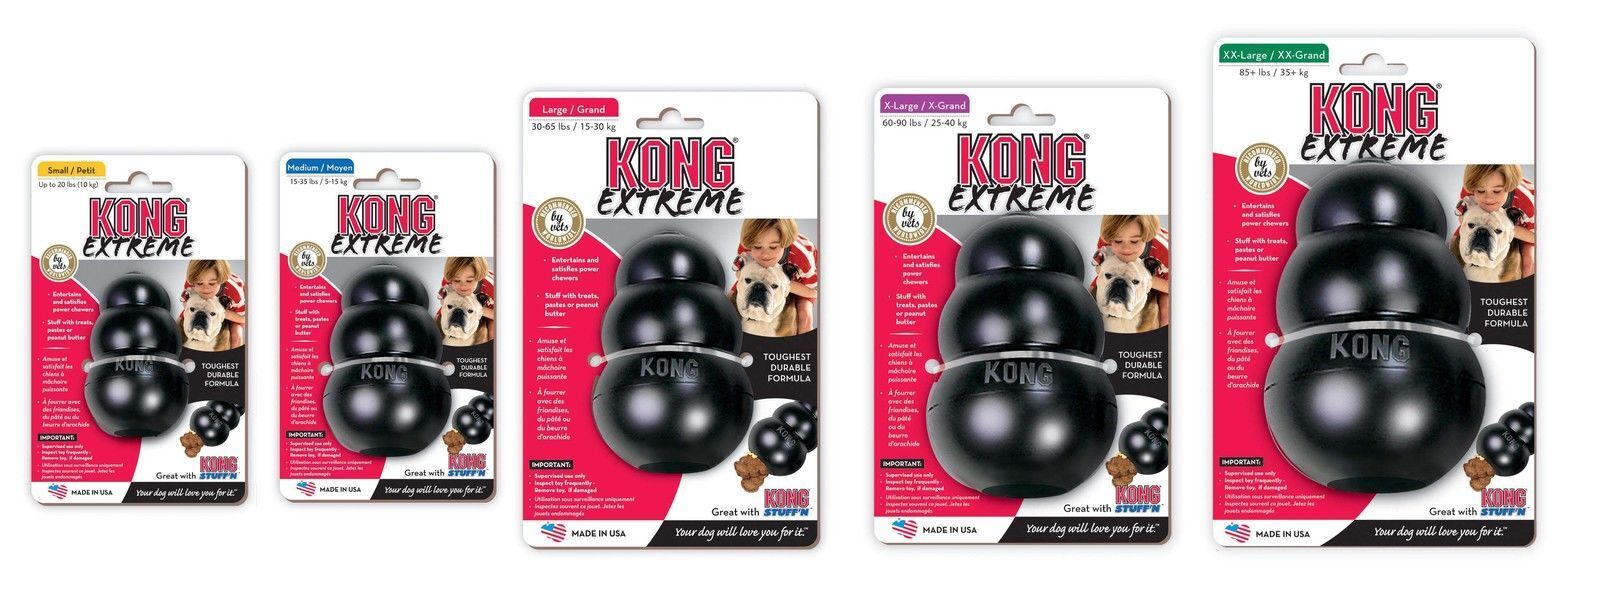 KONG Classic Extreme Black Interactive Dog Toy - for Tough Dogs! King - XX-Large - 2 Unit/s image 2